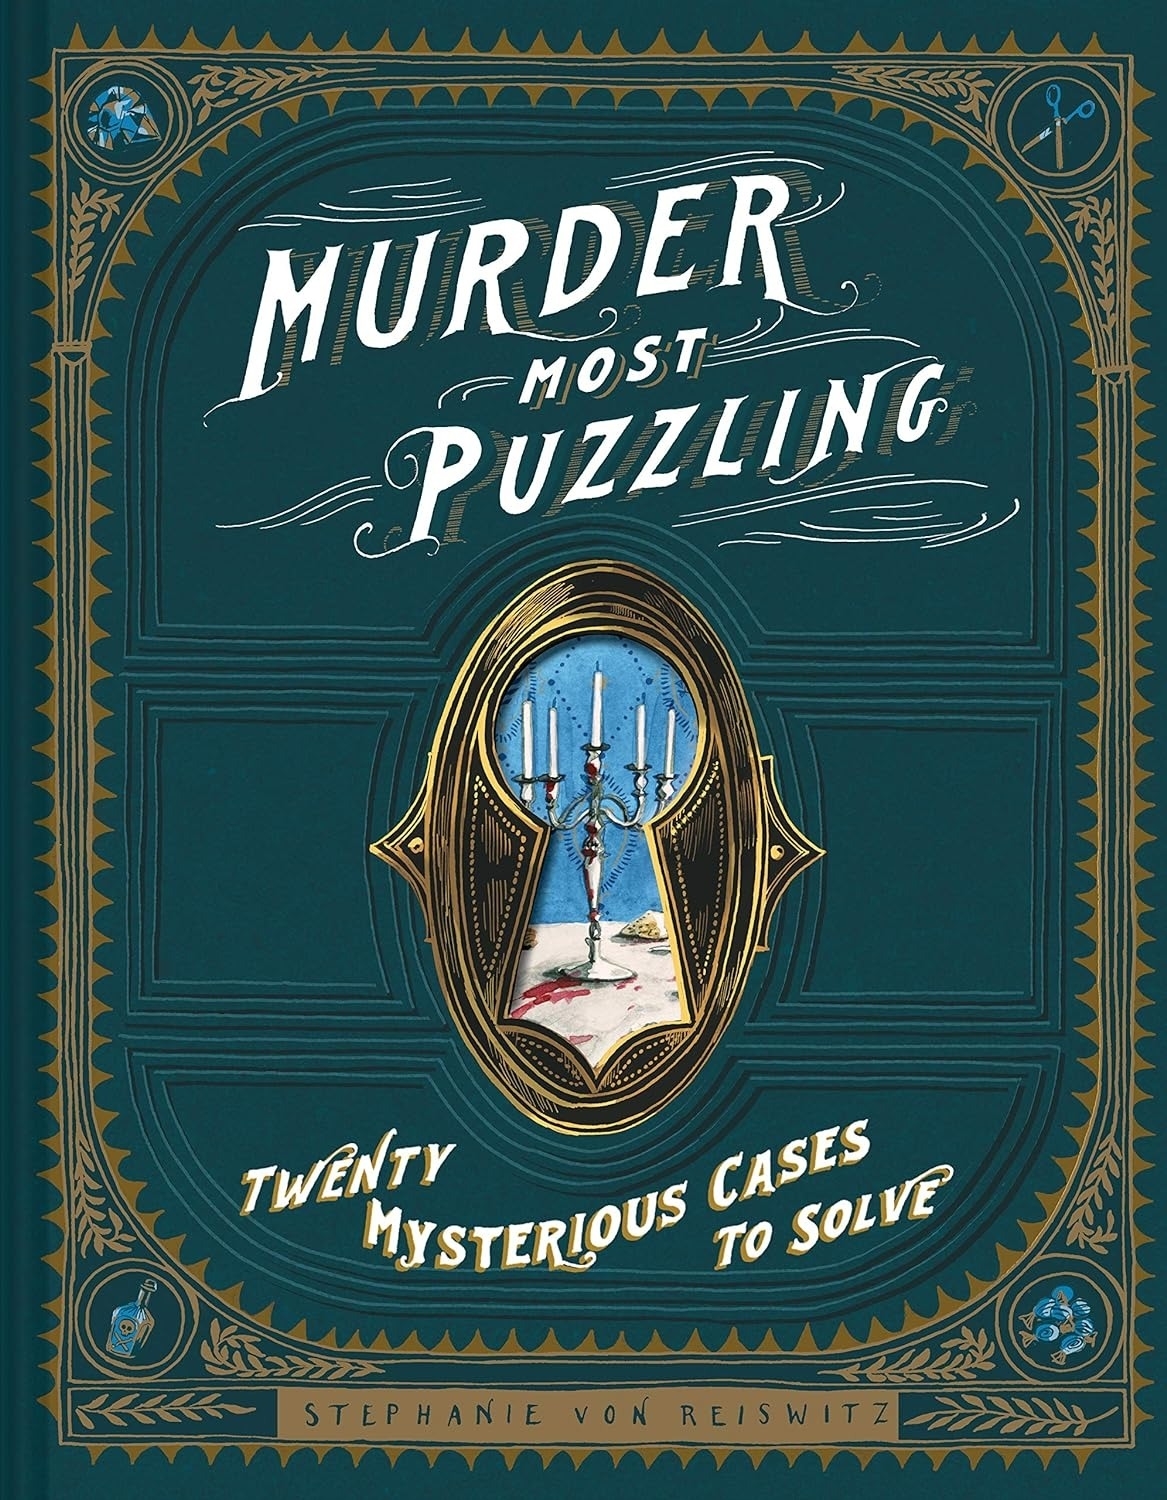 Cover of &quot;Murder Most Puzzling&quot; book featuring title and an ornate mirror with a crime scene